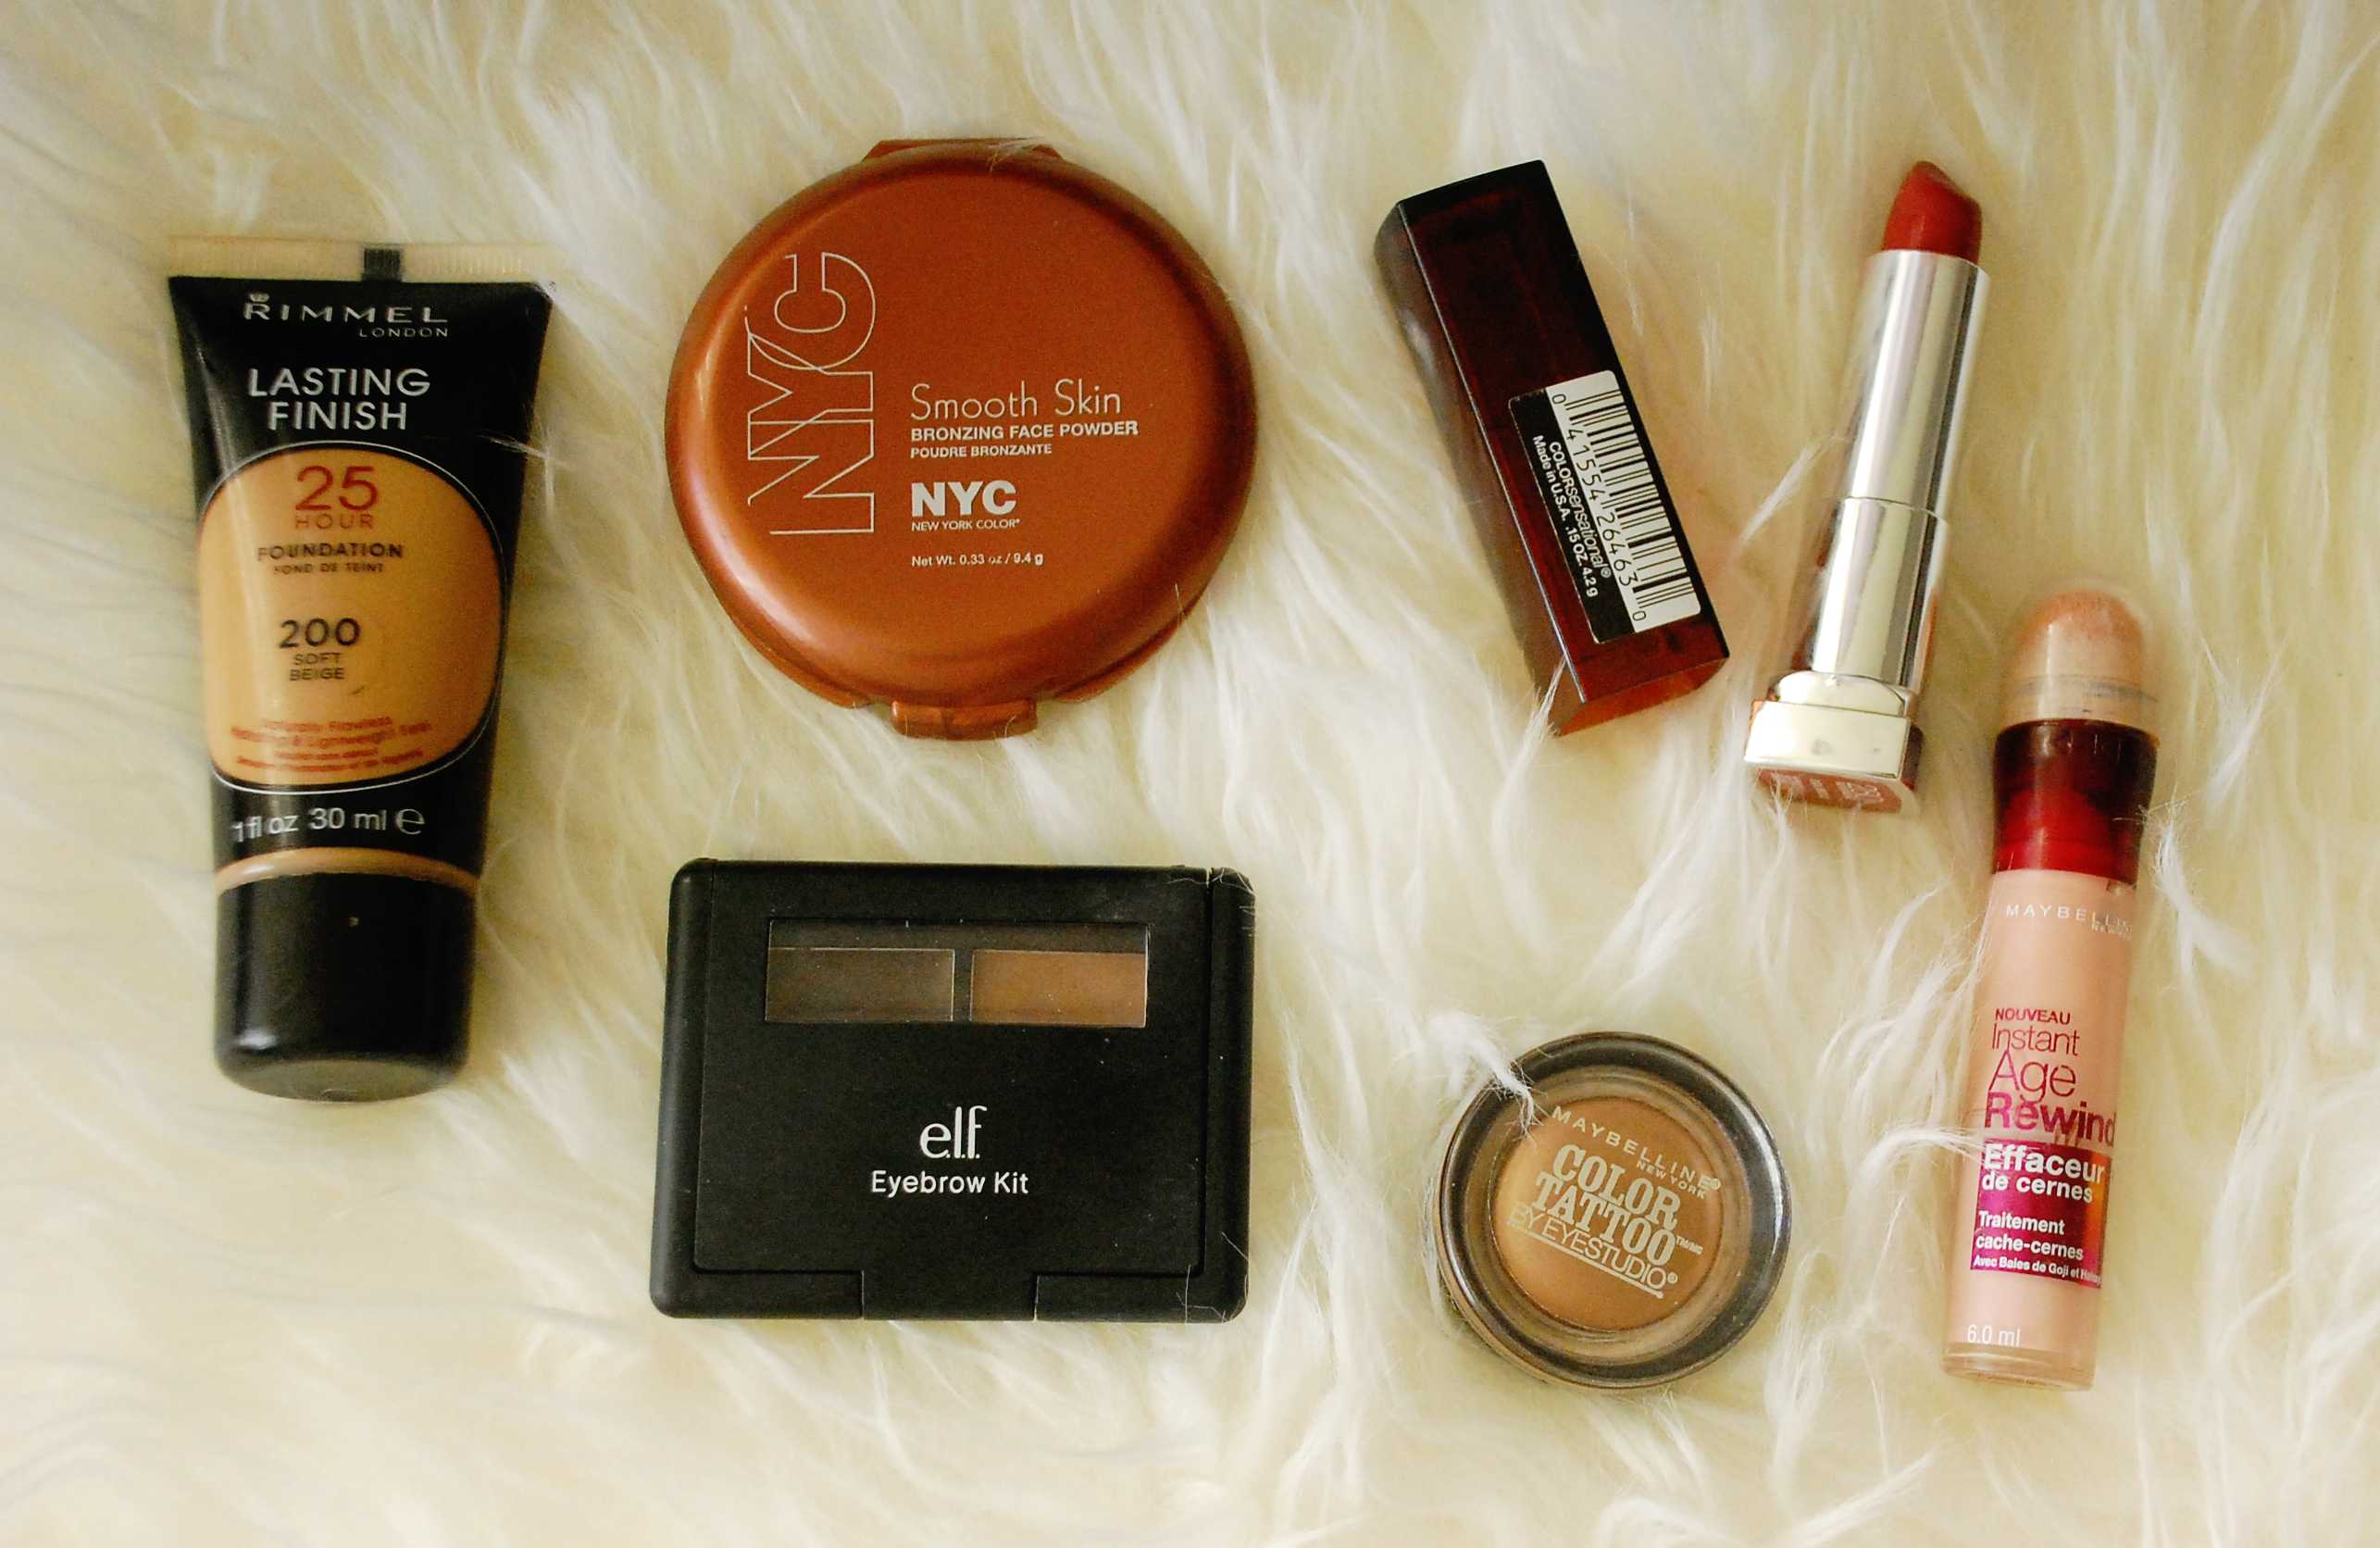 Six drugstore makeup items $8 – Daily Sundial